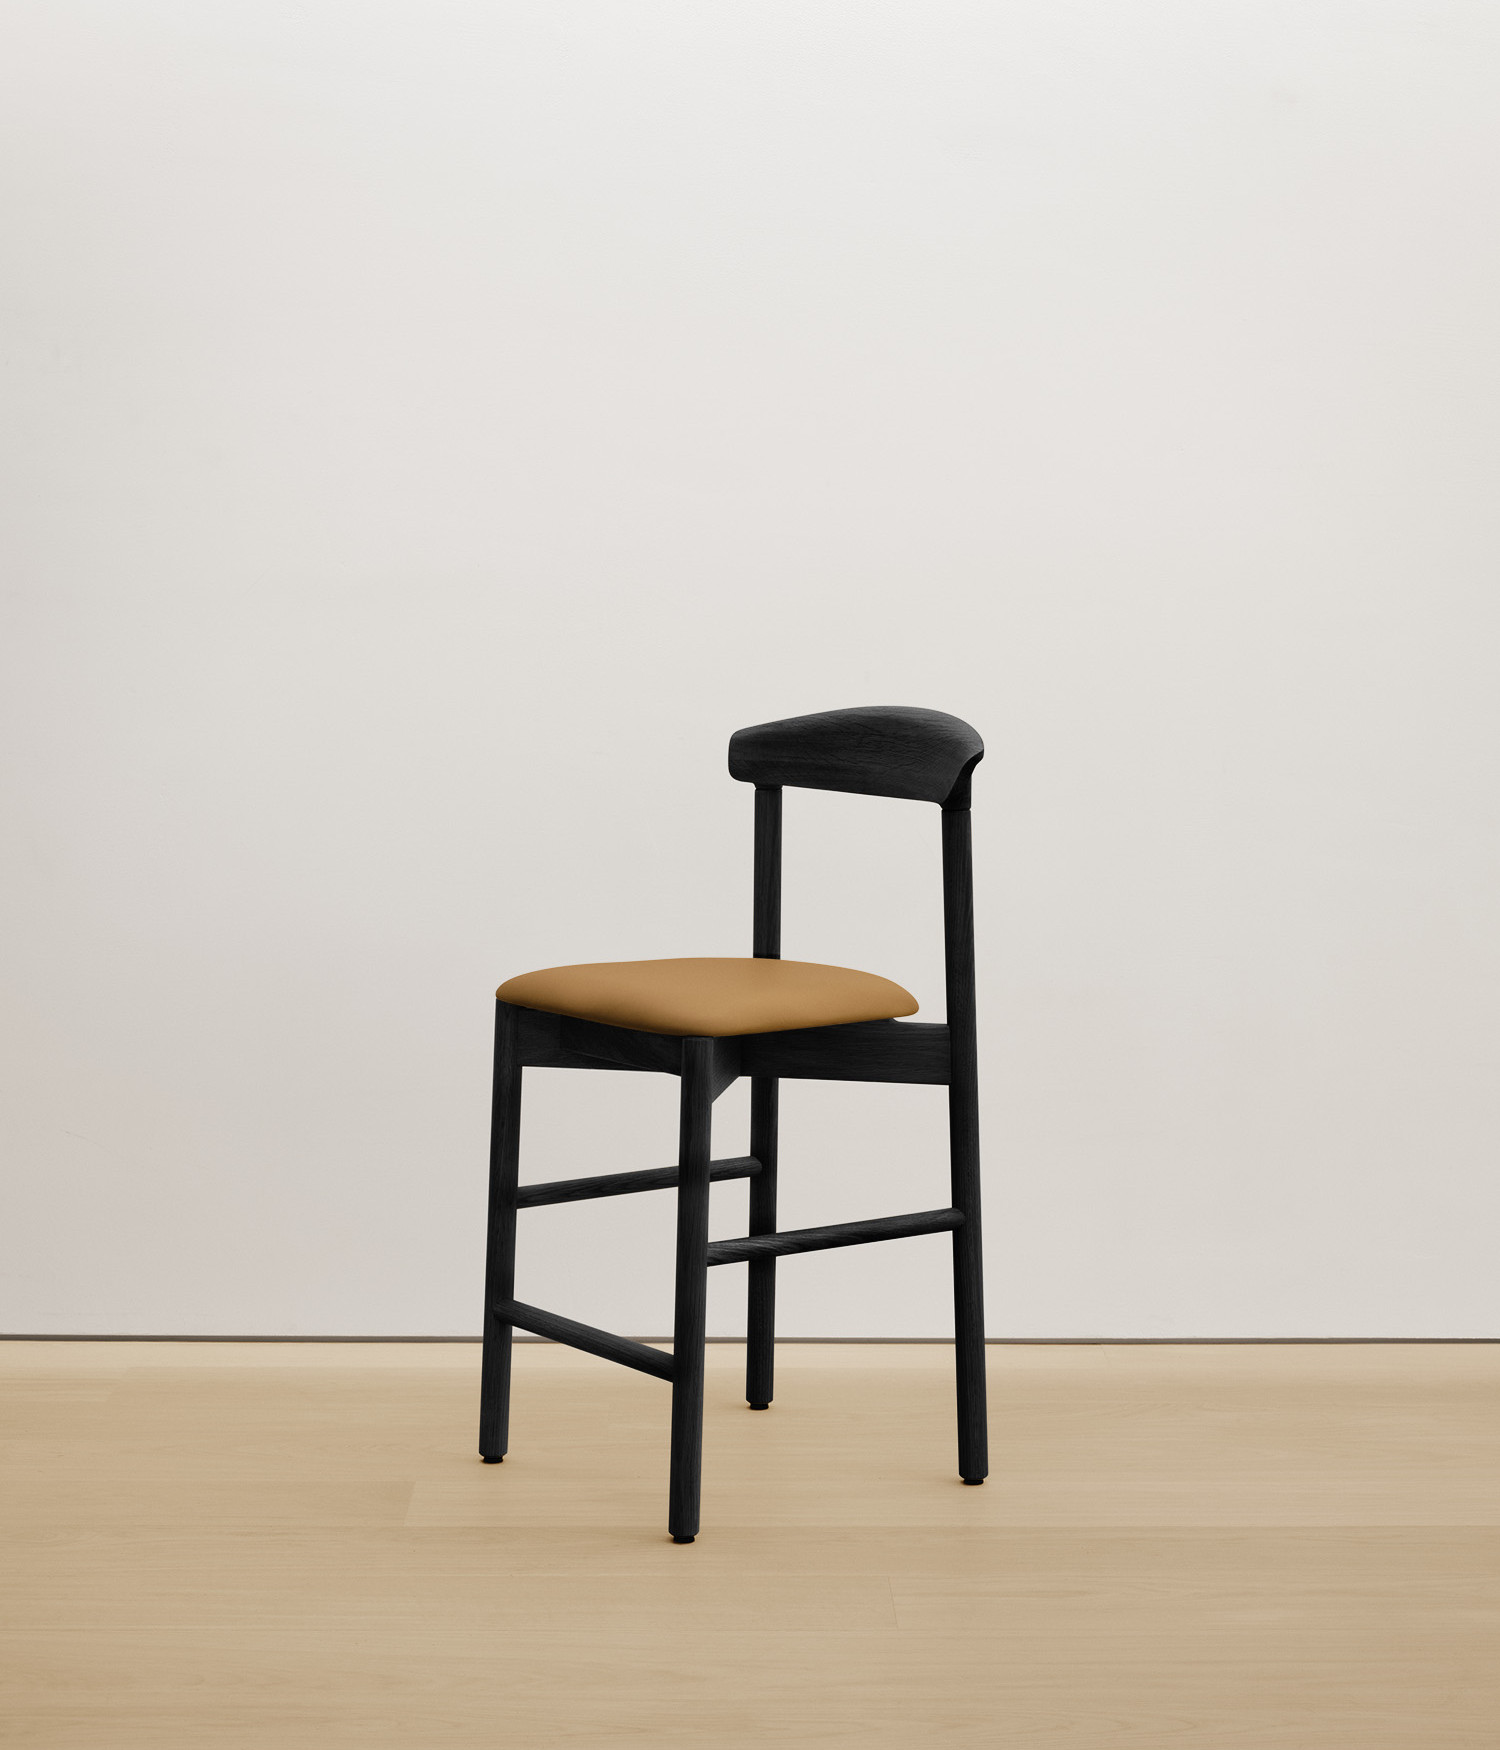  black-stained-oak stool with tan color upholstered seat 